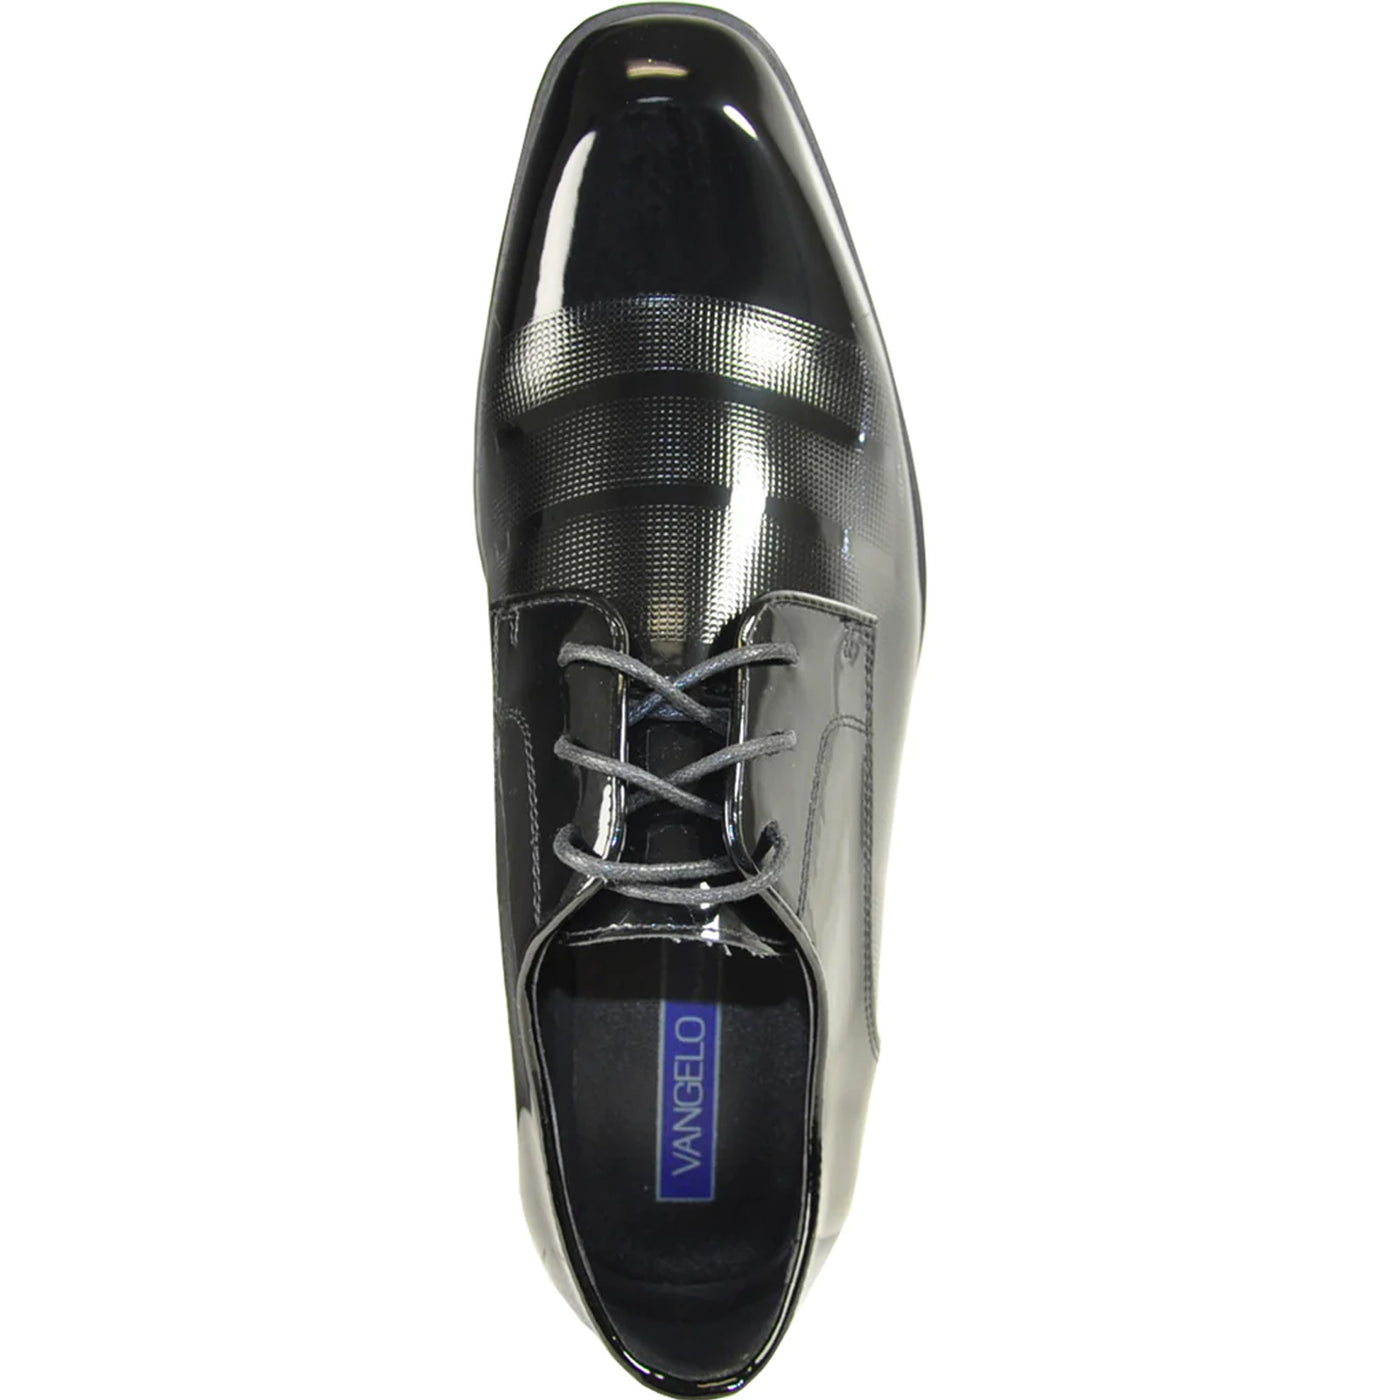 Mens Classic Patent Textured Tuxedo Oxford Lace Up Dress Shoe in Black